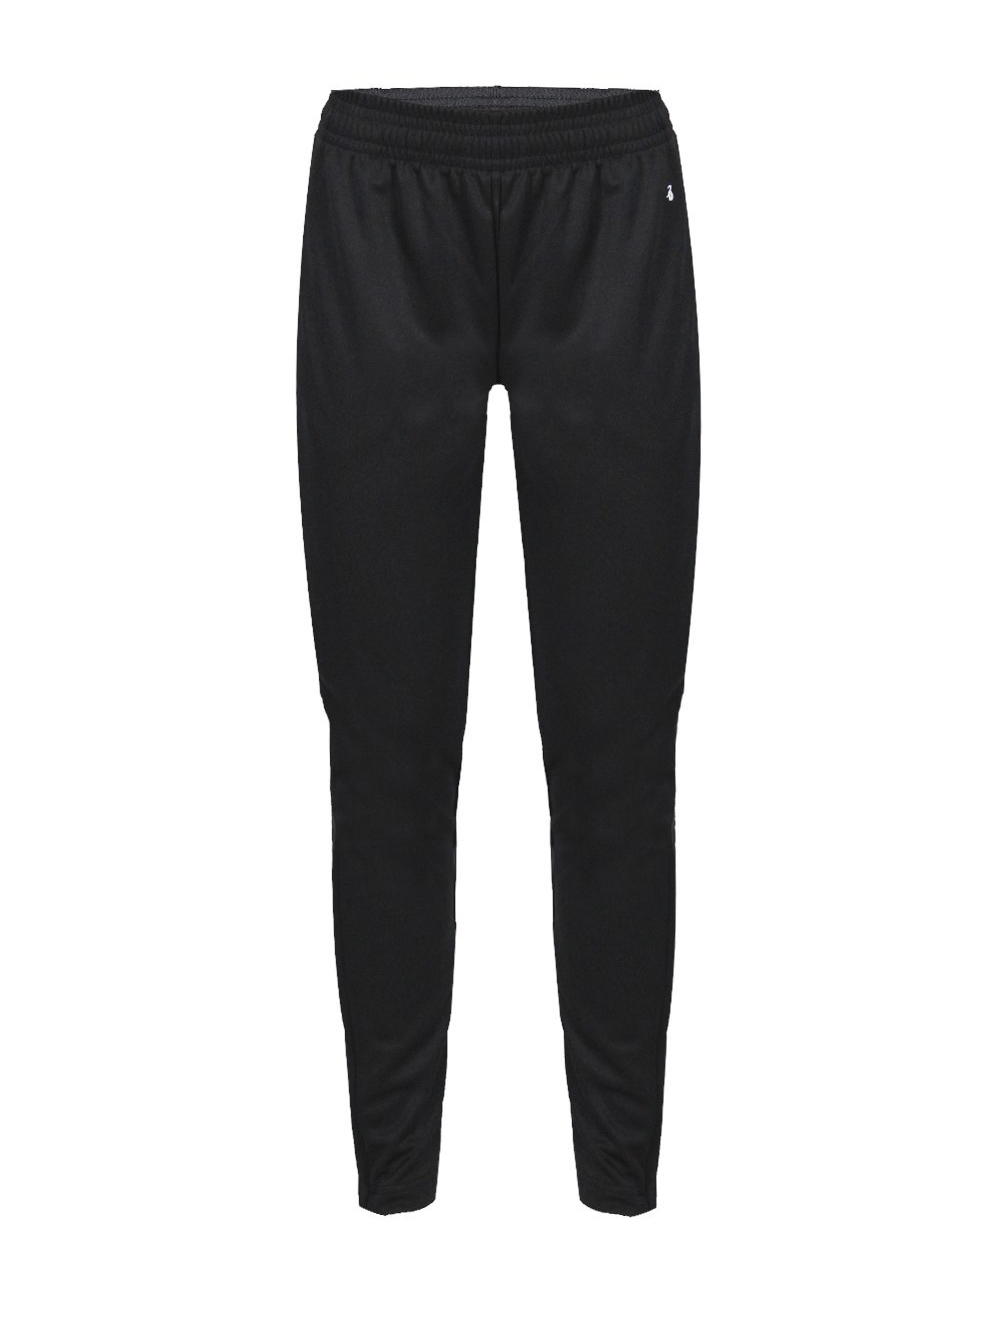 Badger Trainer Pant | Midwest Volleyball Warehouse